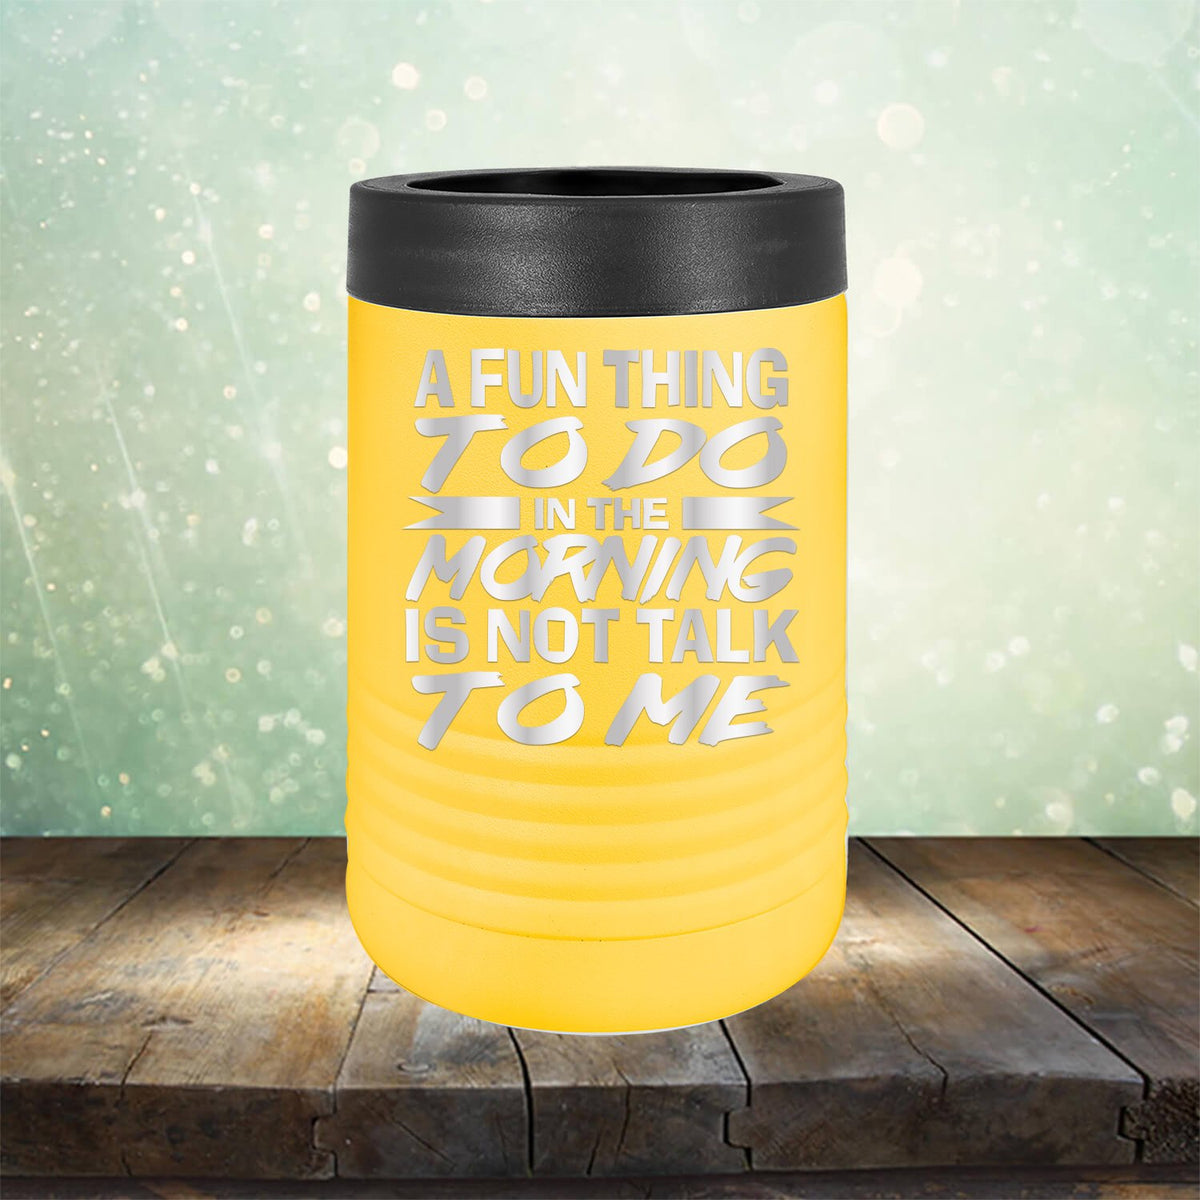 A Fun Thing To Do in The Morning is Not Talk To Me - Laser Etched Tumbler Mug